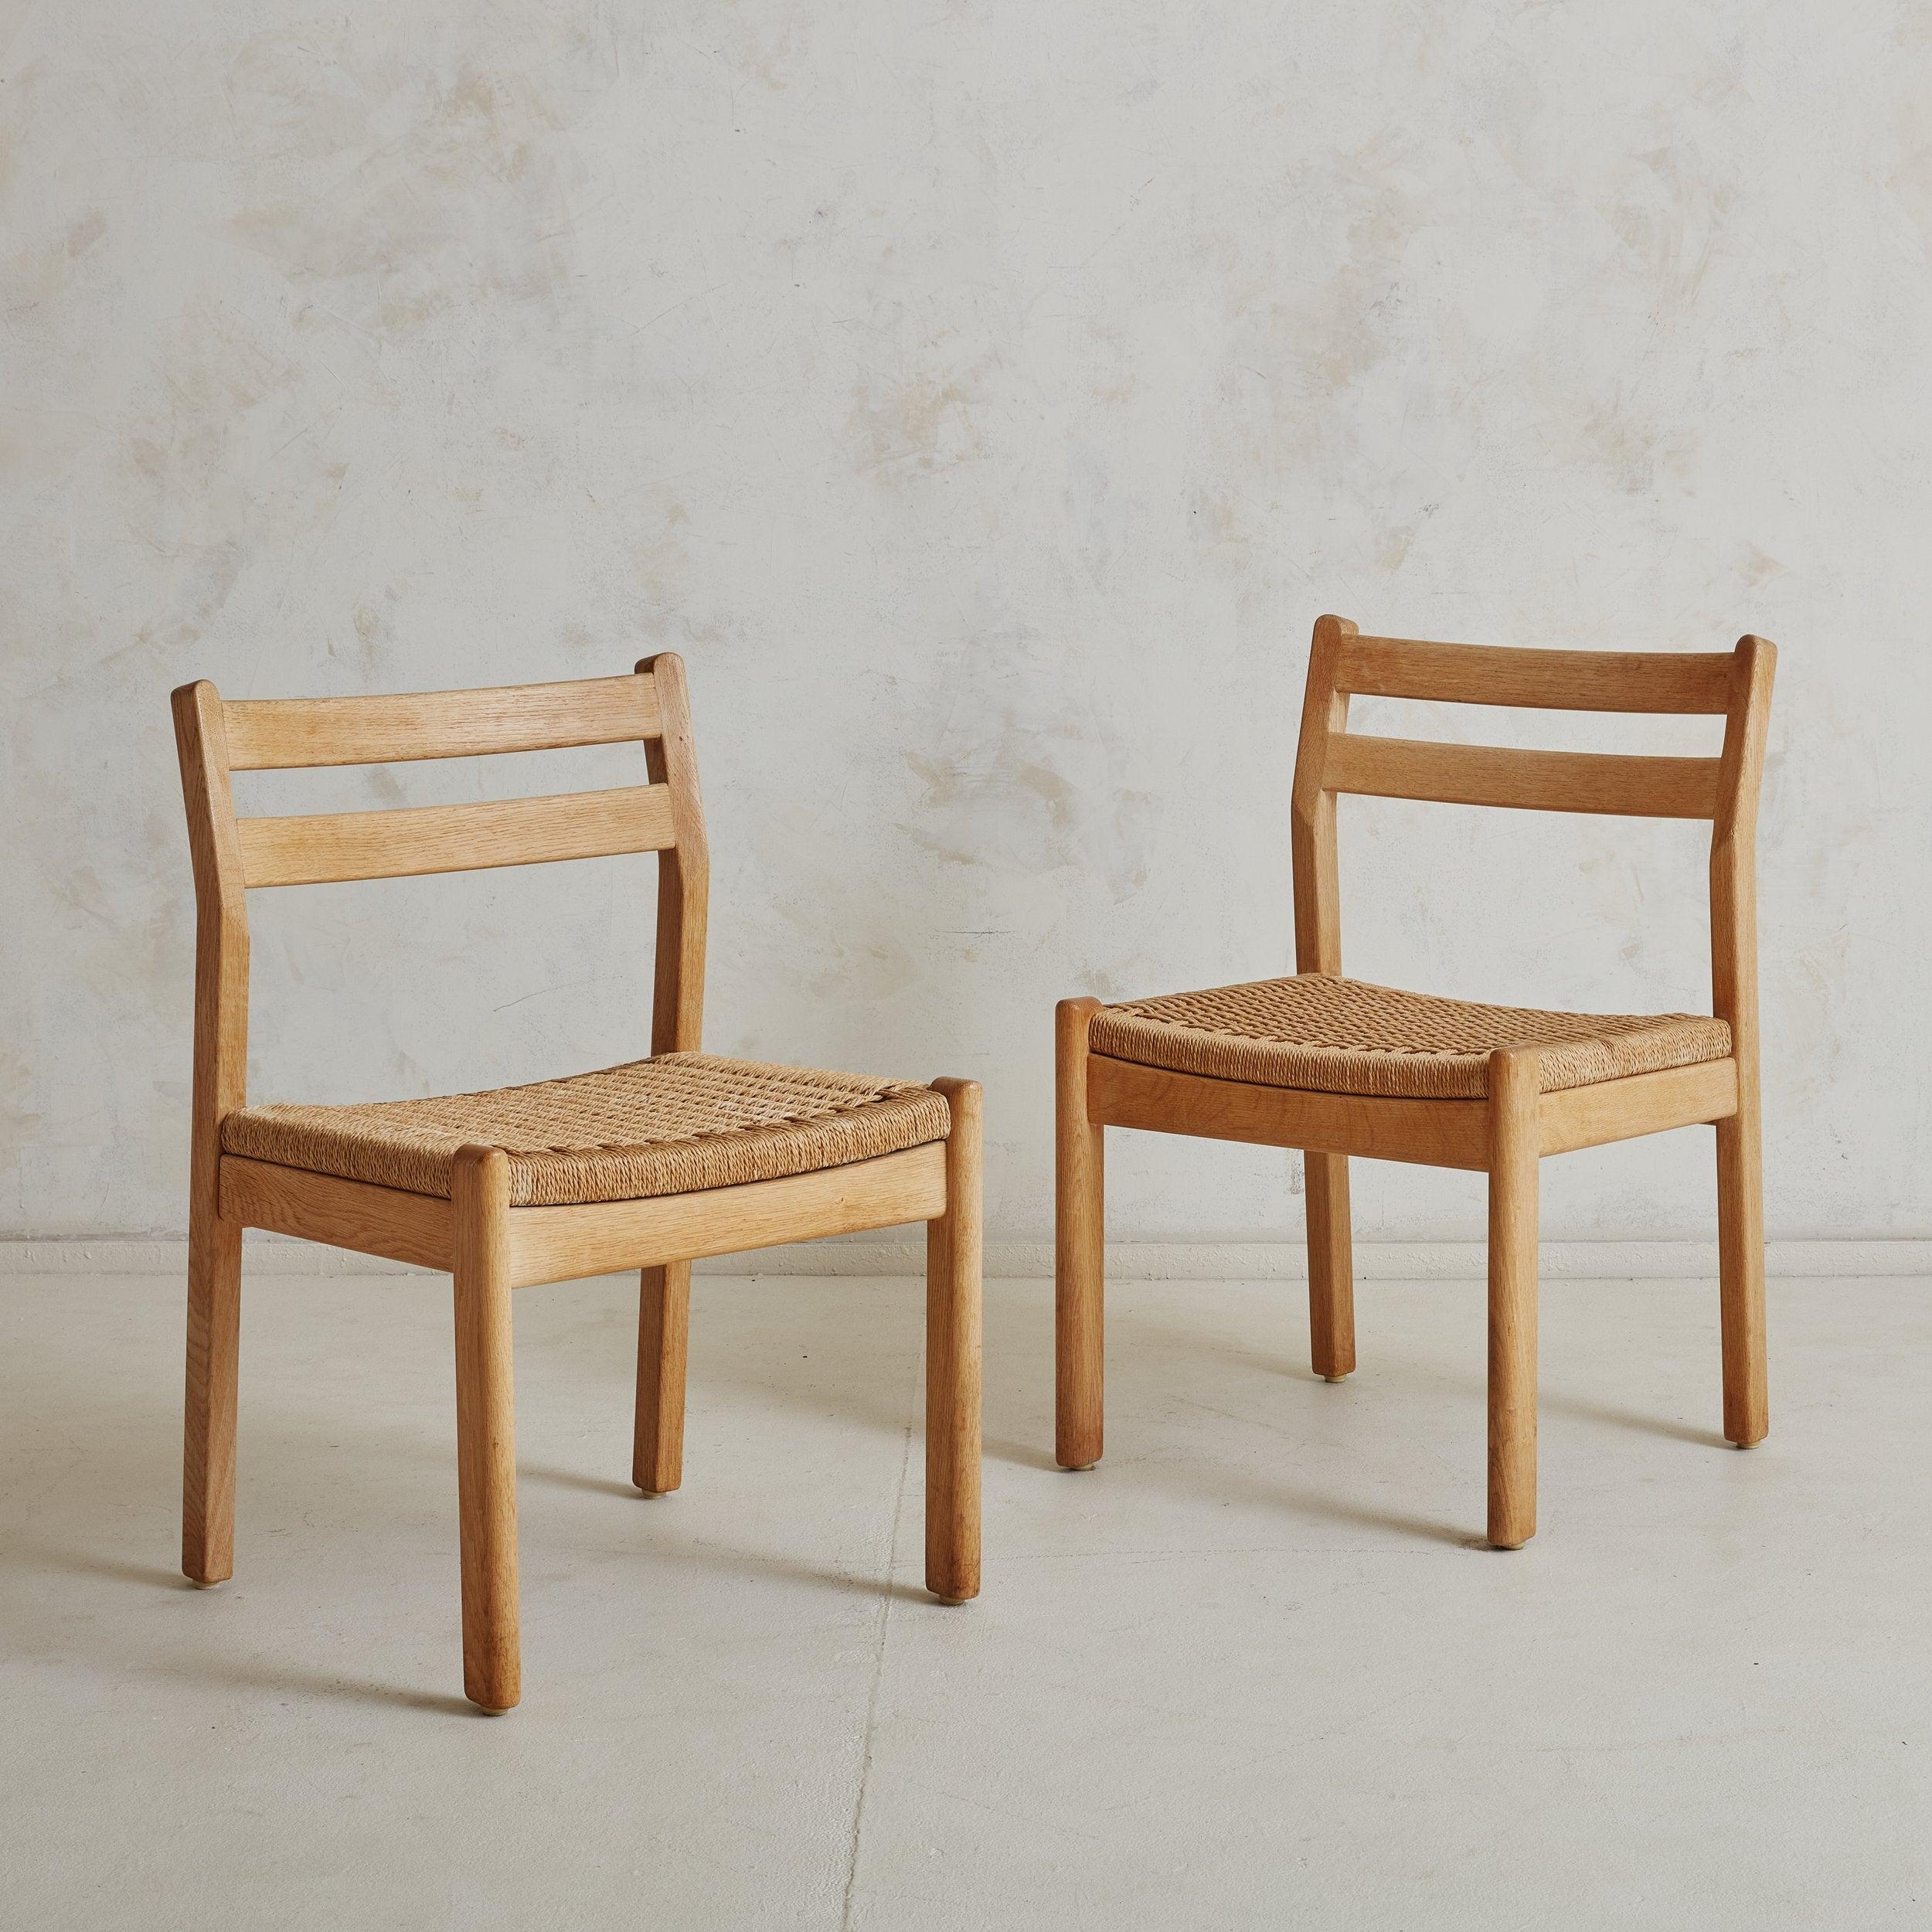 Set of 3 Danish wood and woven papercord dining chairs designed by Kurt Østervig in the 1960s. These Scandinavian Modern dining chairs feature minimalistic frames composed of stunning blonde wood and intricately woven papercord seats. The tightly